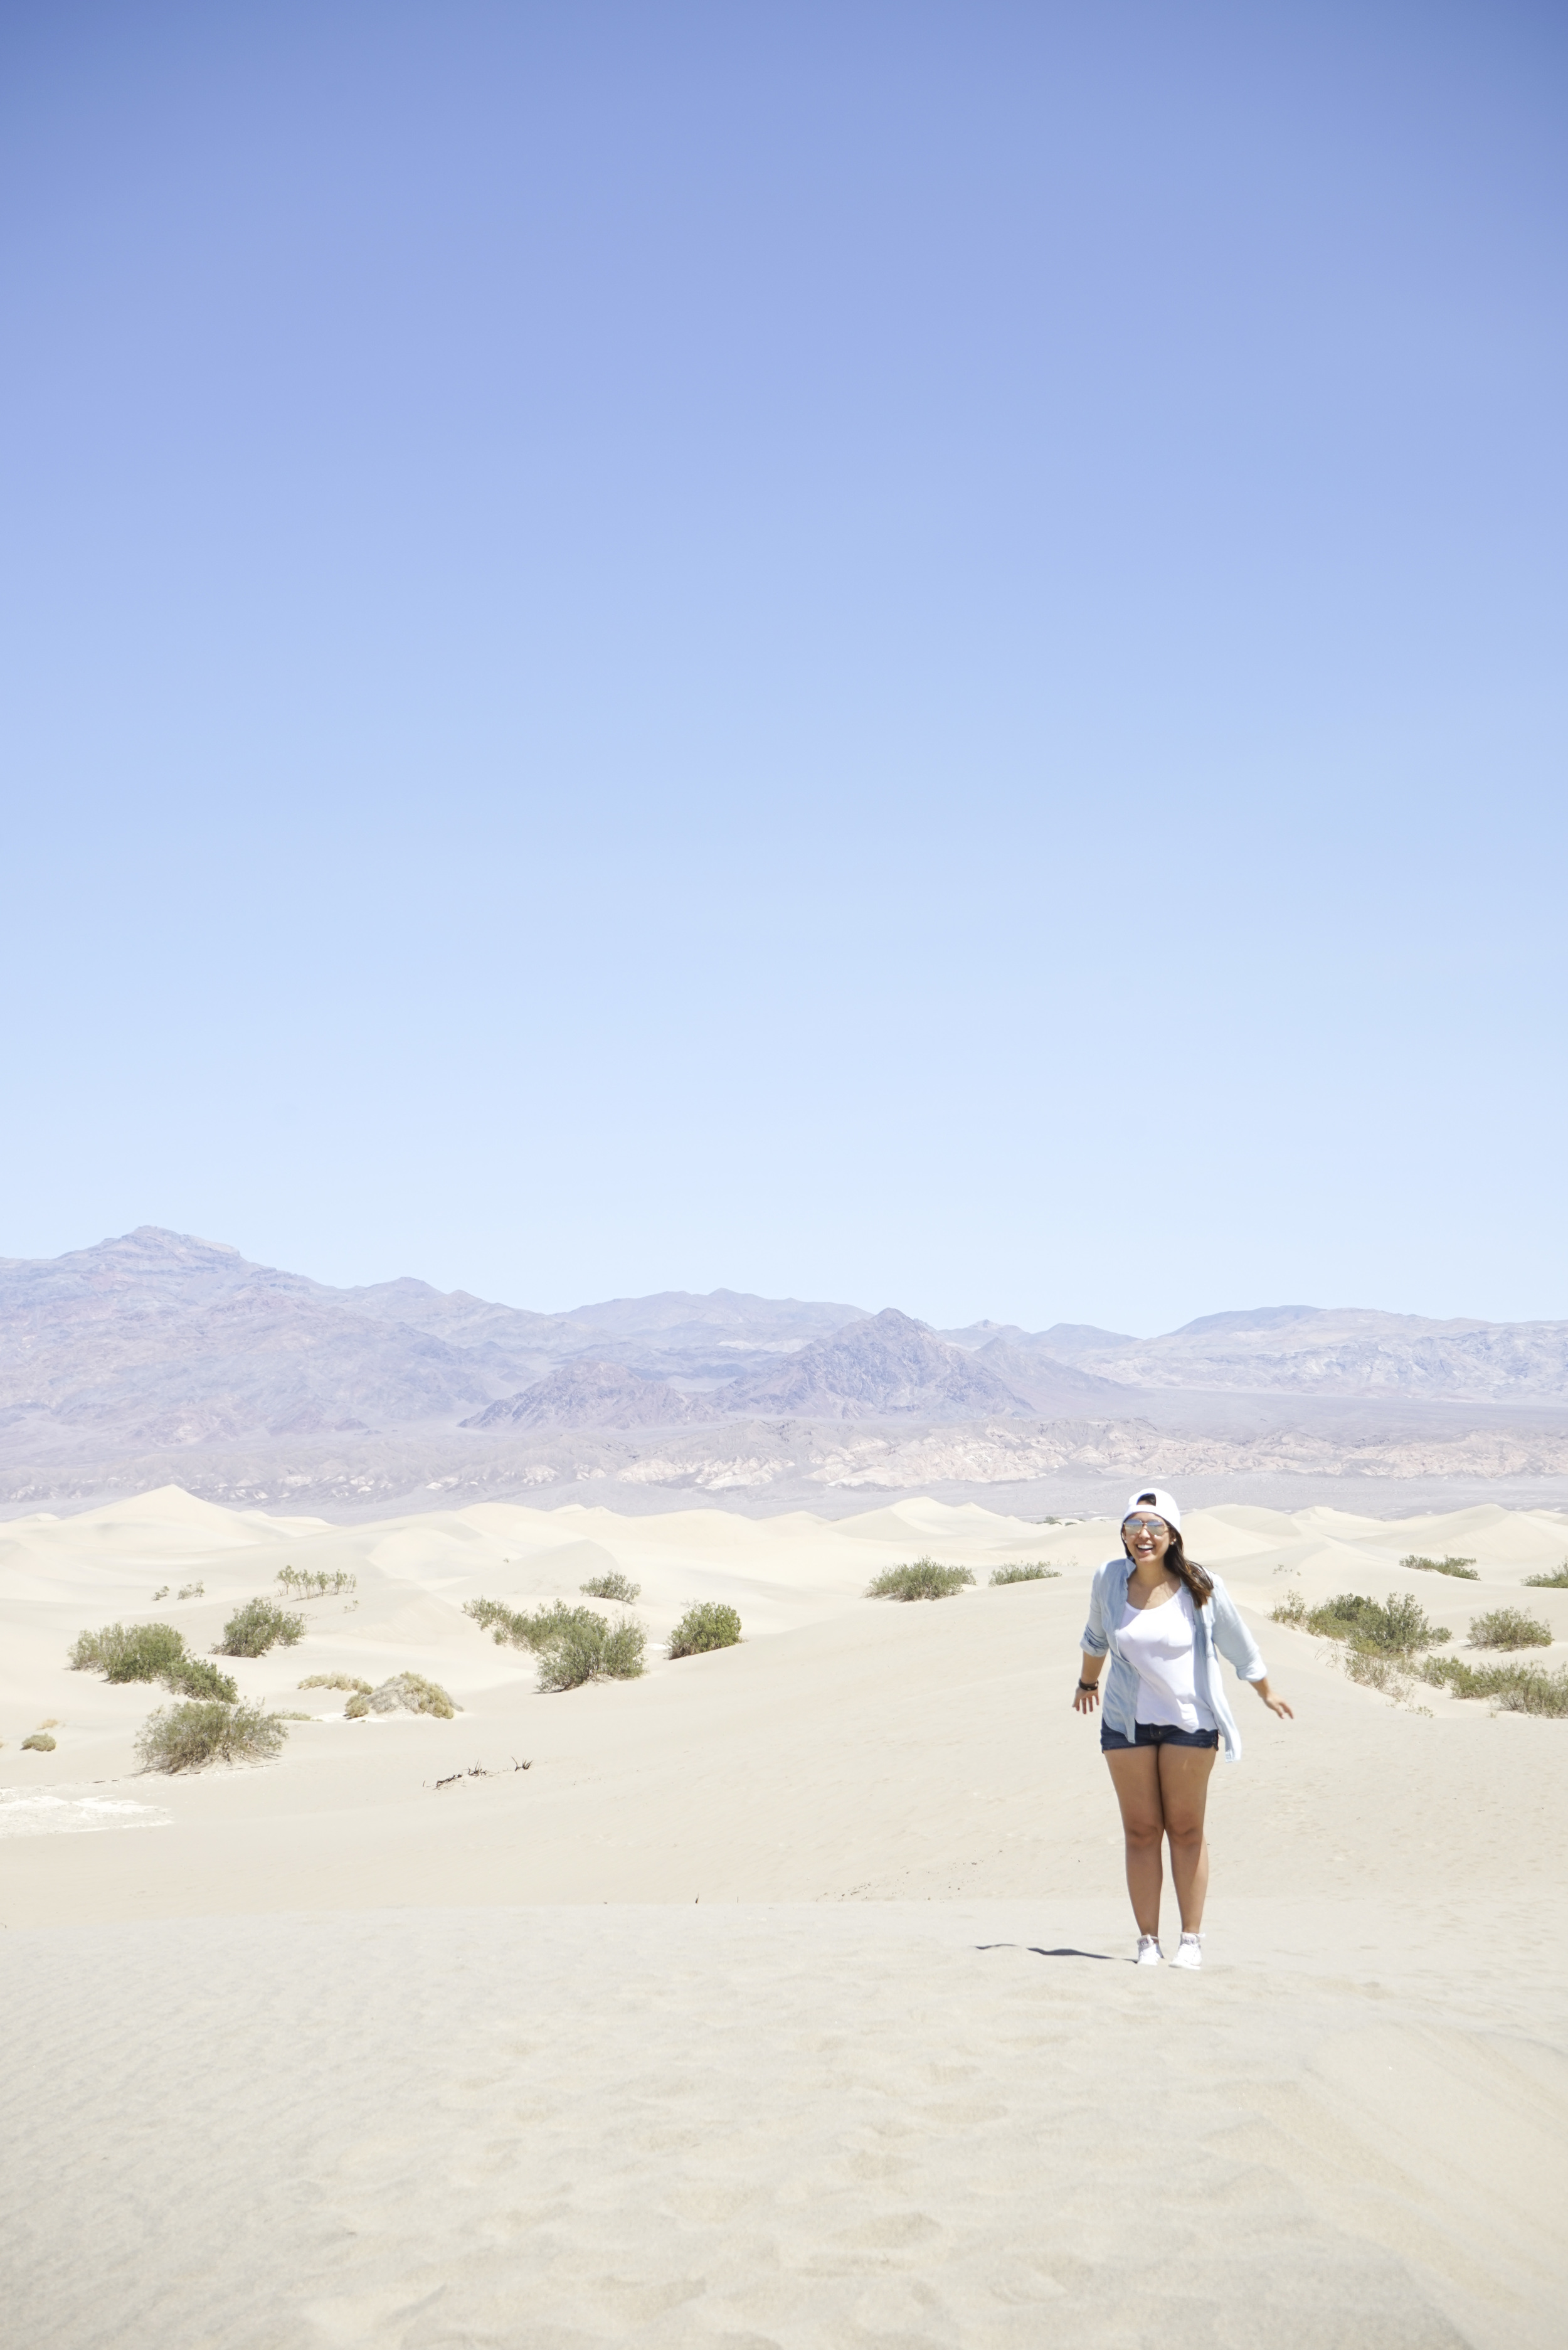 5 Reasons to Visit Death Valley Now - Shannon Did What?